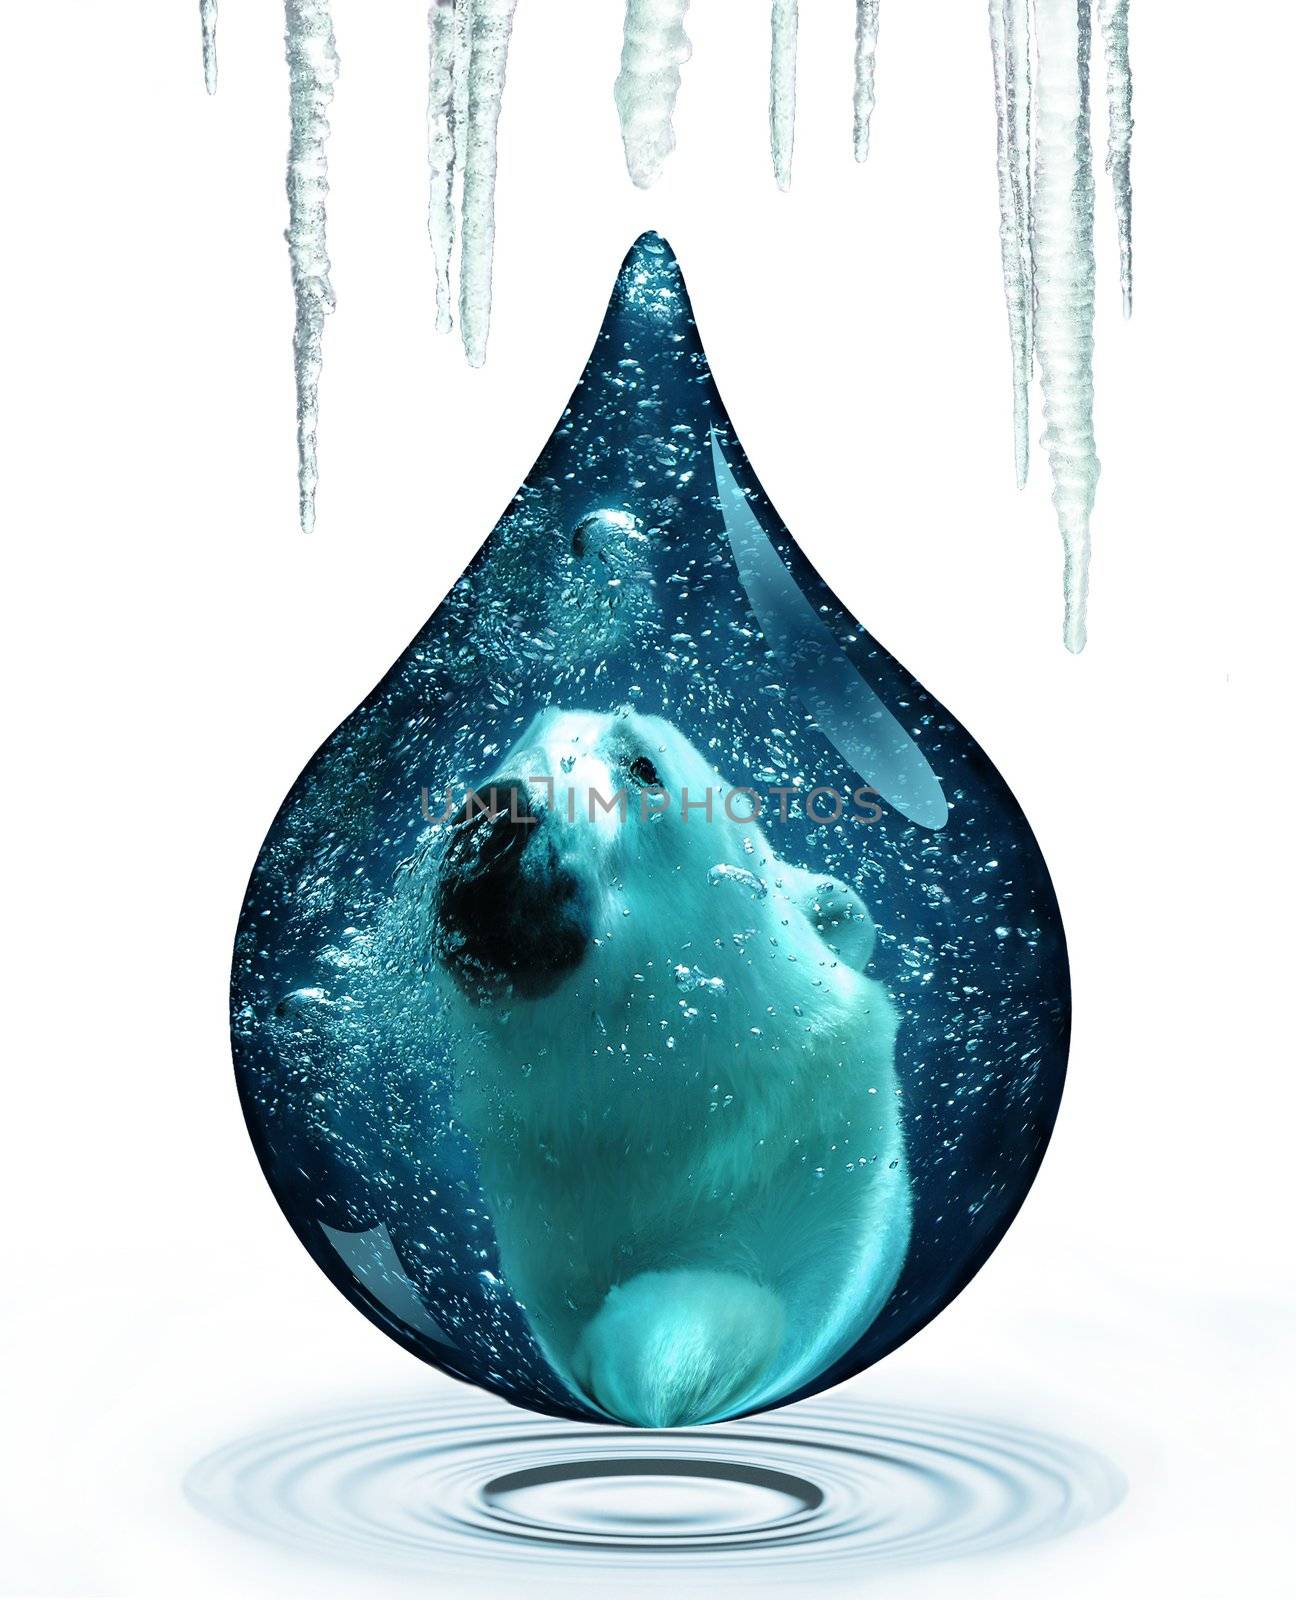 Polar bear and climate change by Mirage3